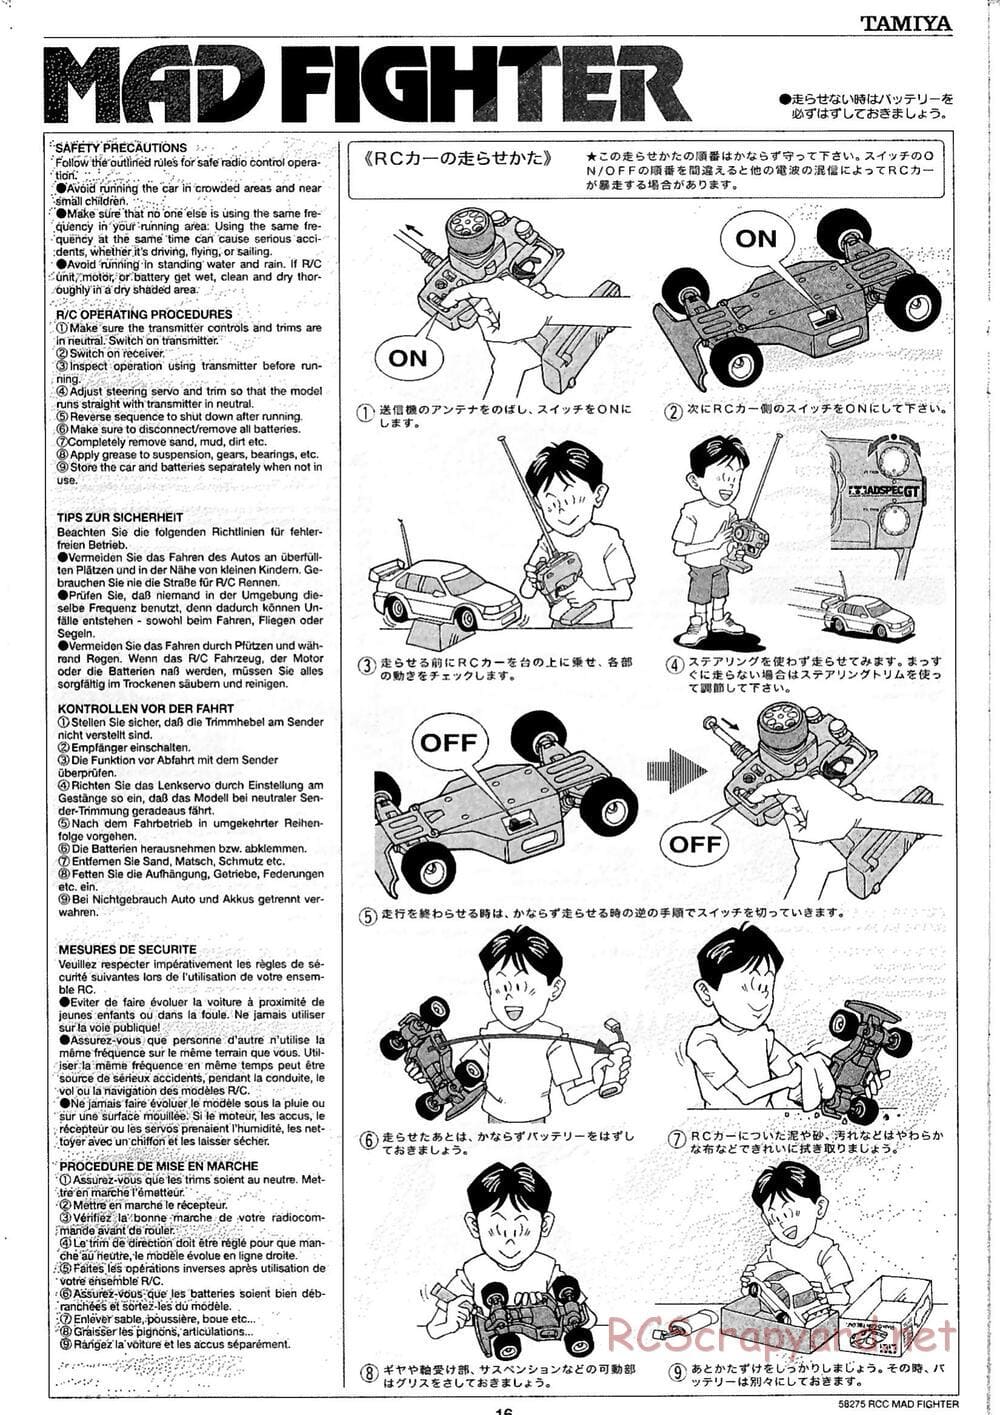 Tamiya - Mad Fighter Chassis - Manual - Page 16